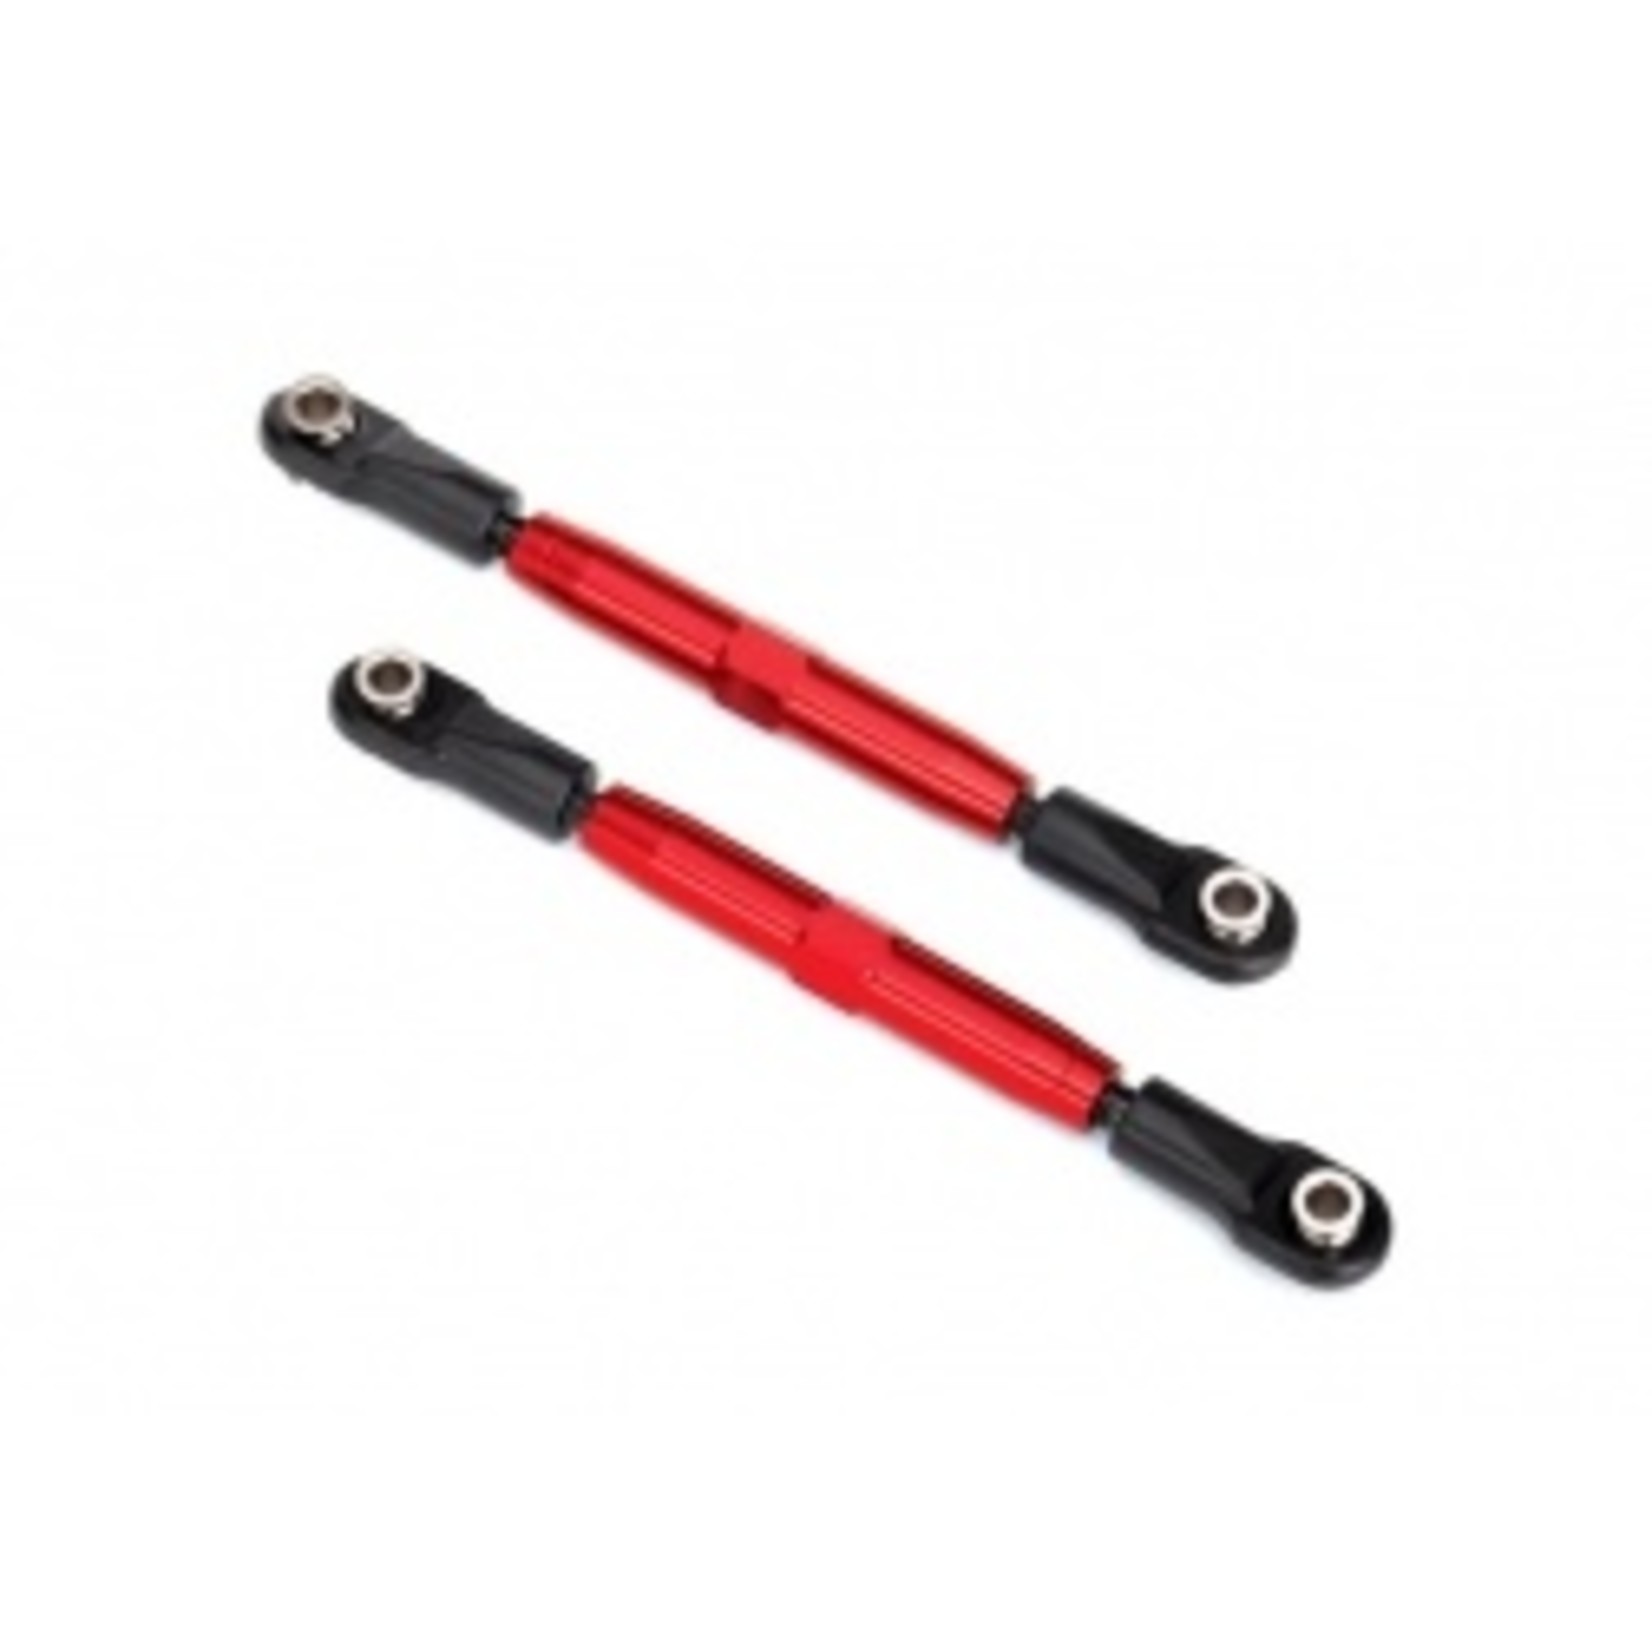 Traxxas 3643R Camber links, front (TUBES red-anodized, 7075-T6 aluminum, stronger than titanium) 83mm